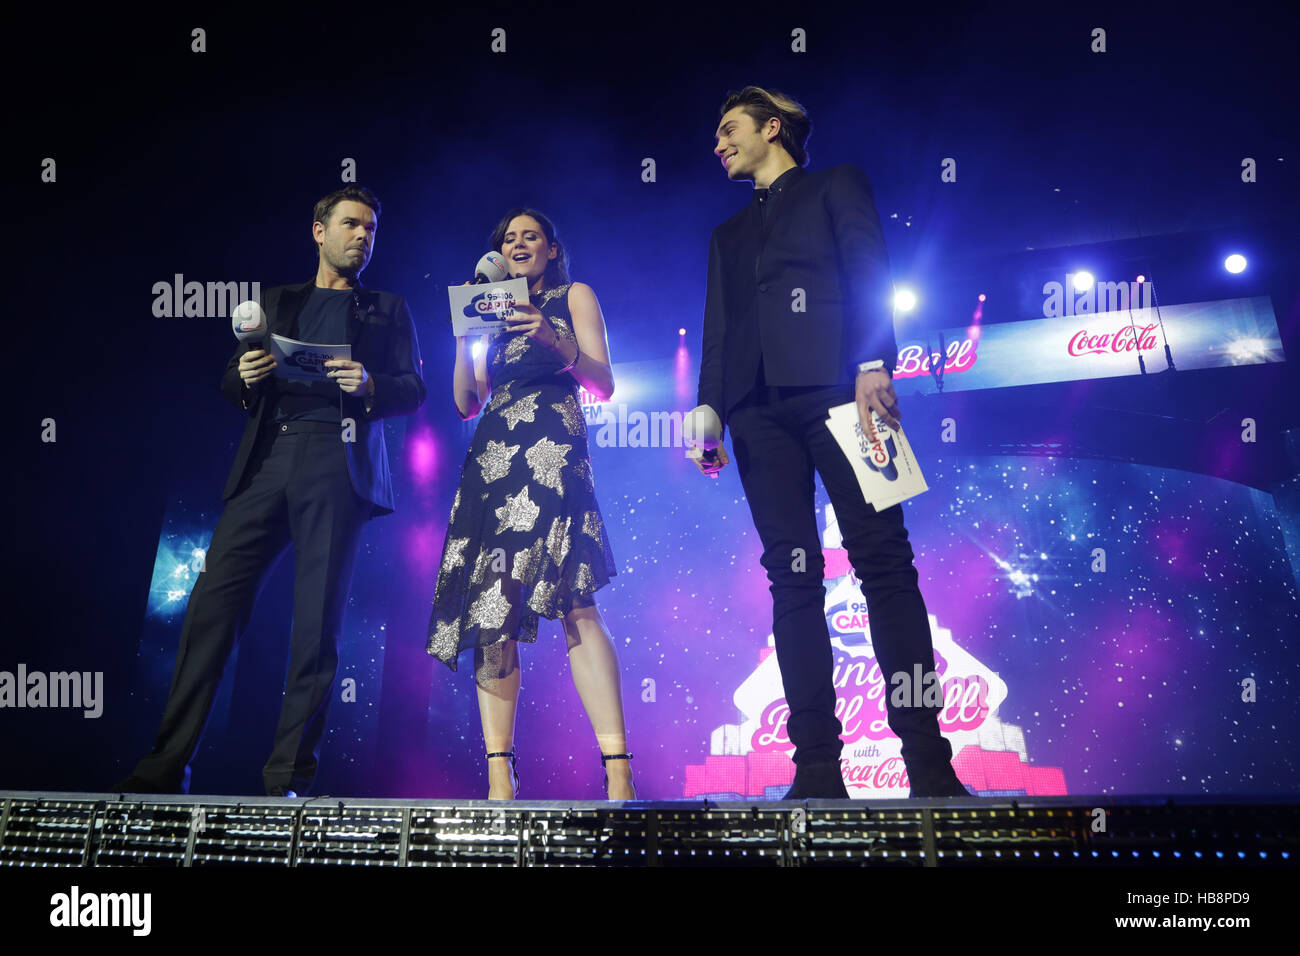 Capital presenters Dave Berry, Lilah Parsons and George Shelley on stage at Capital's Jingle Bell Ball with Coca-Cola at London's O2 arena. PRESS ASSOCIATION Photo. Picture date: Sunday 4th December 2016. Photo credit should read: Yui Mok/PA Wire Stock Photo